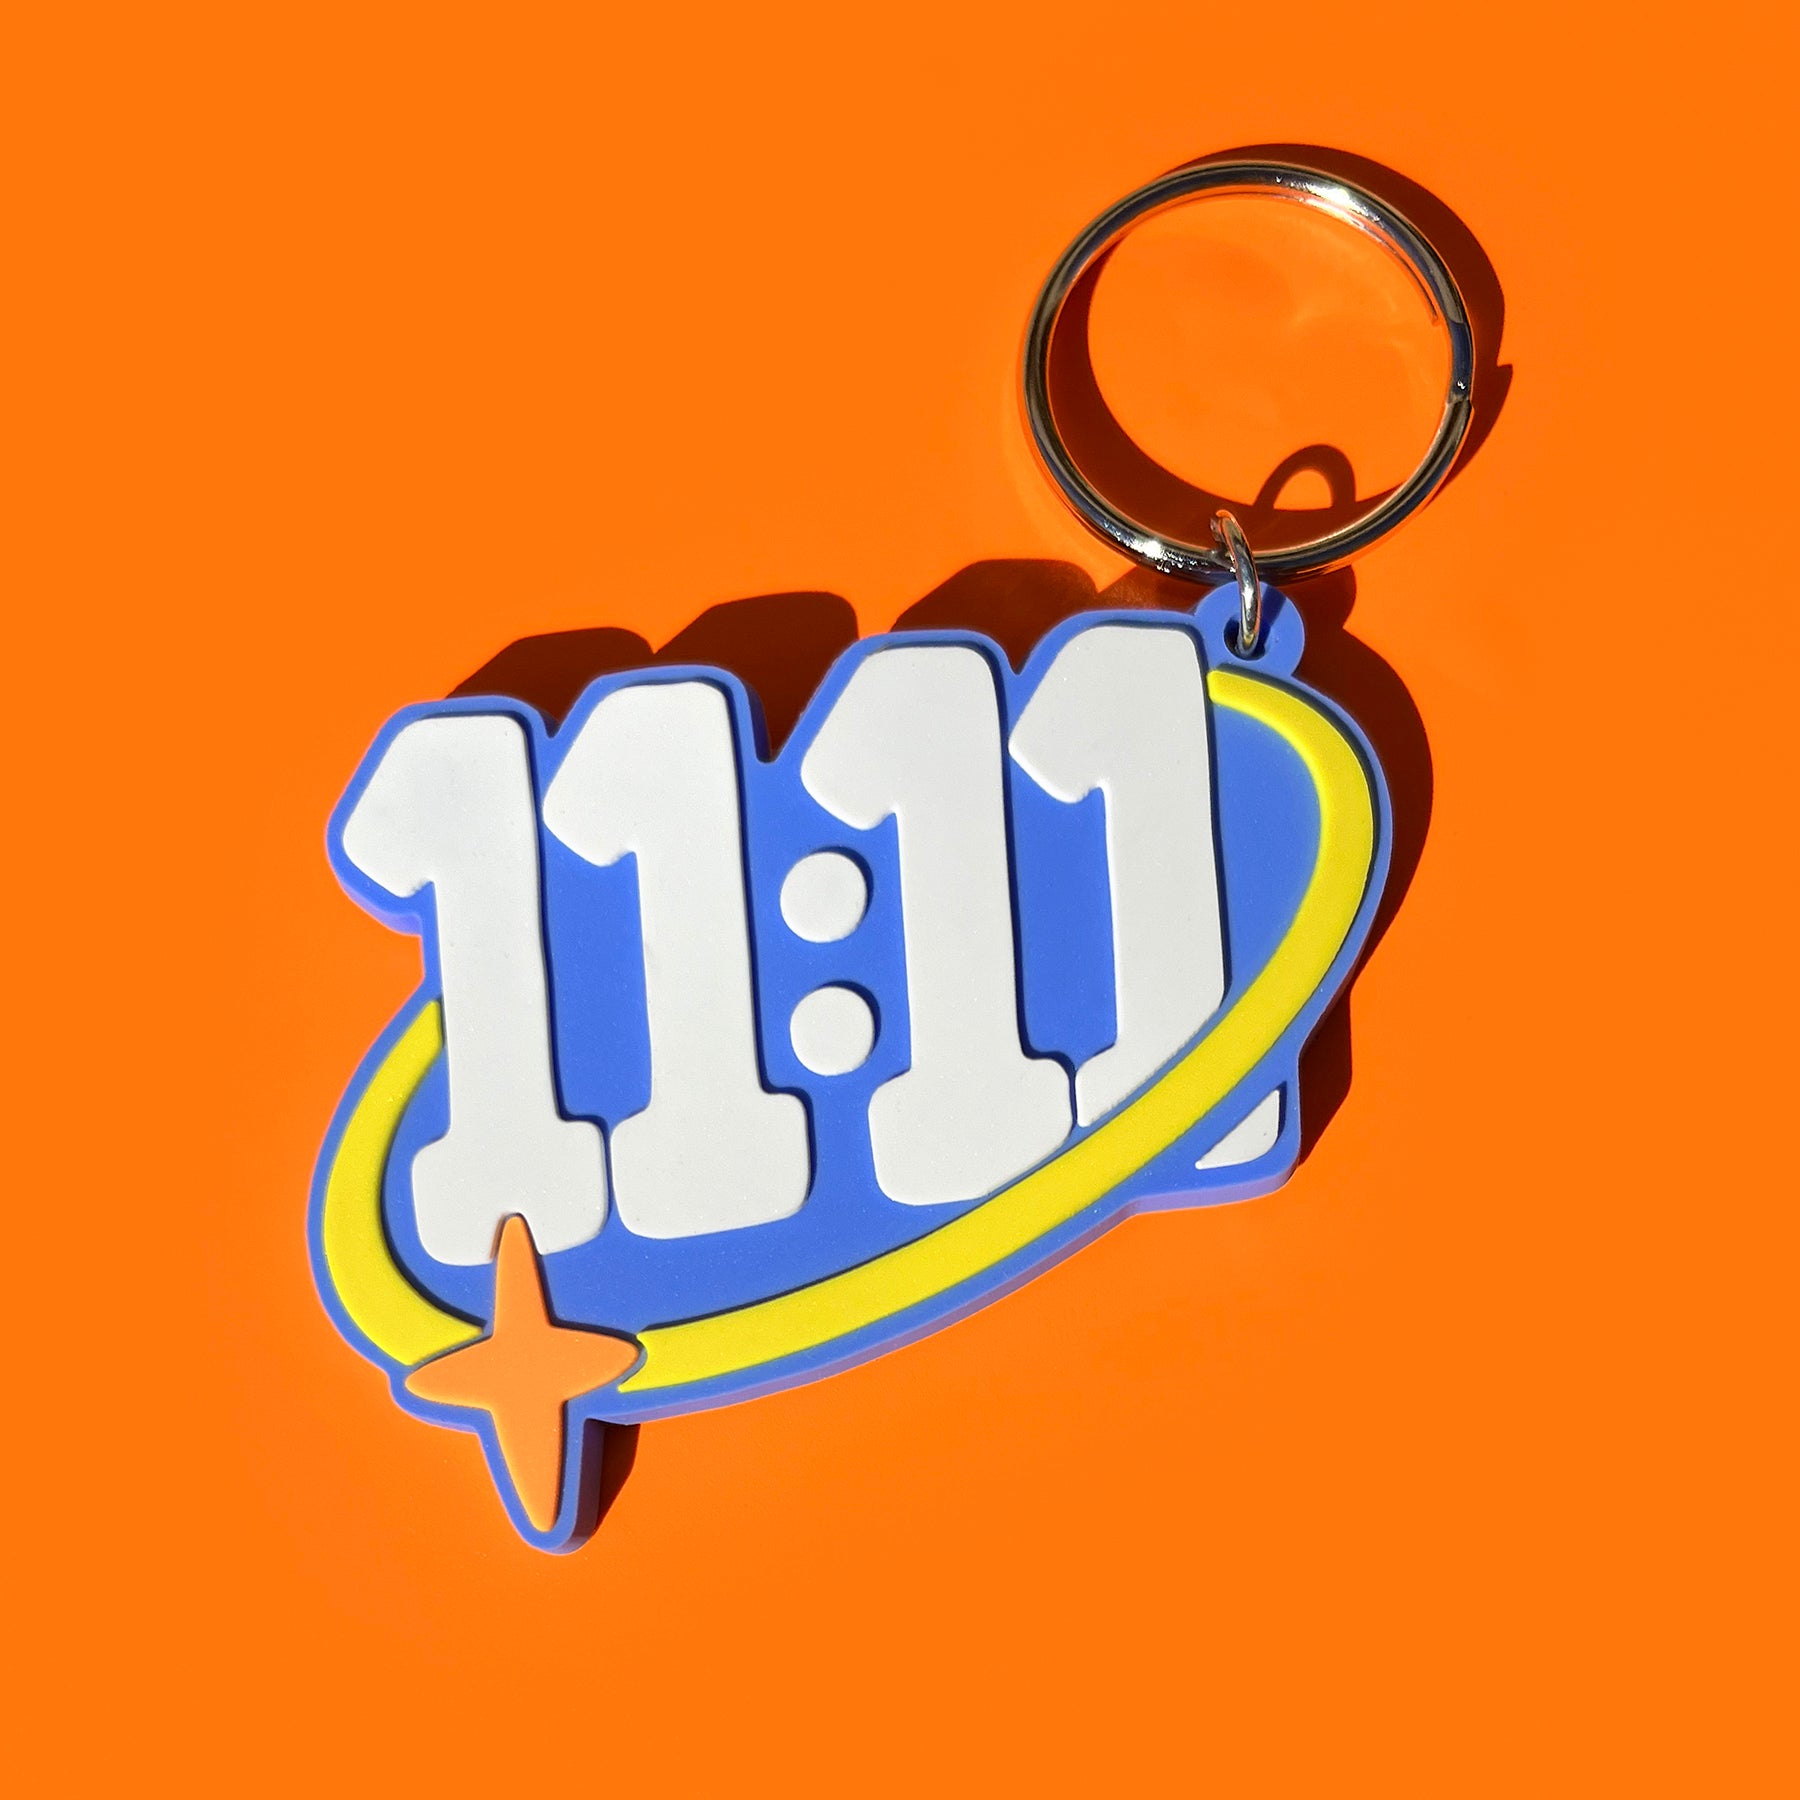 11:11 Lucky Rubber Keychain